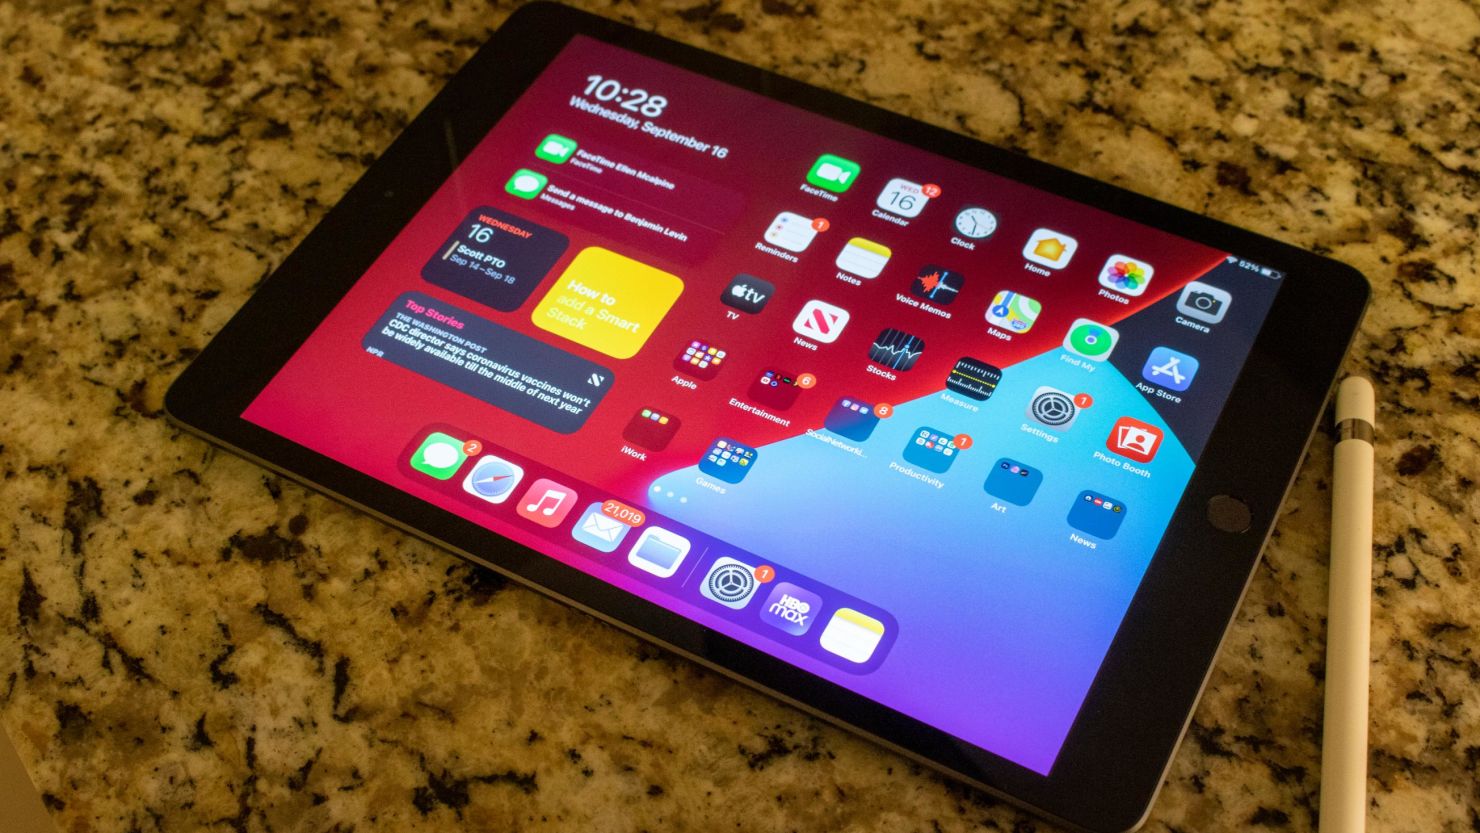 7th Gen iPad 10.2 Hands-On: The new entry level iPad brings more value